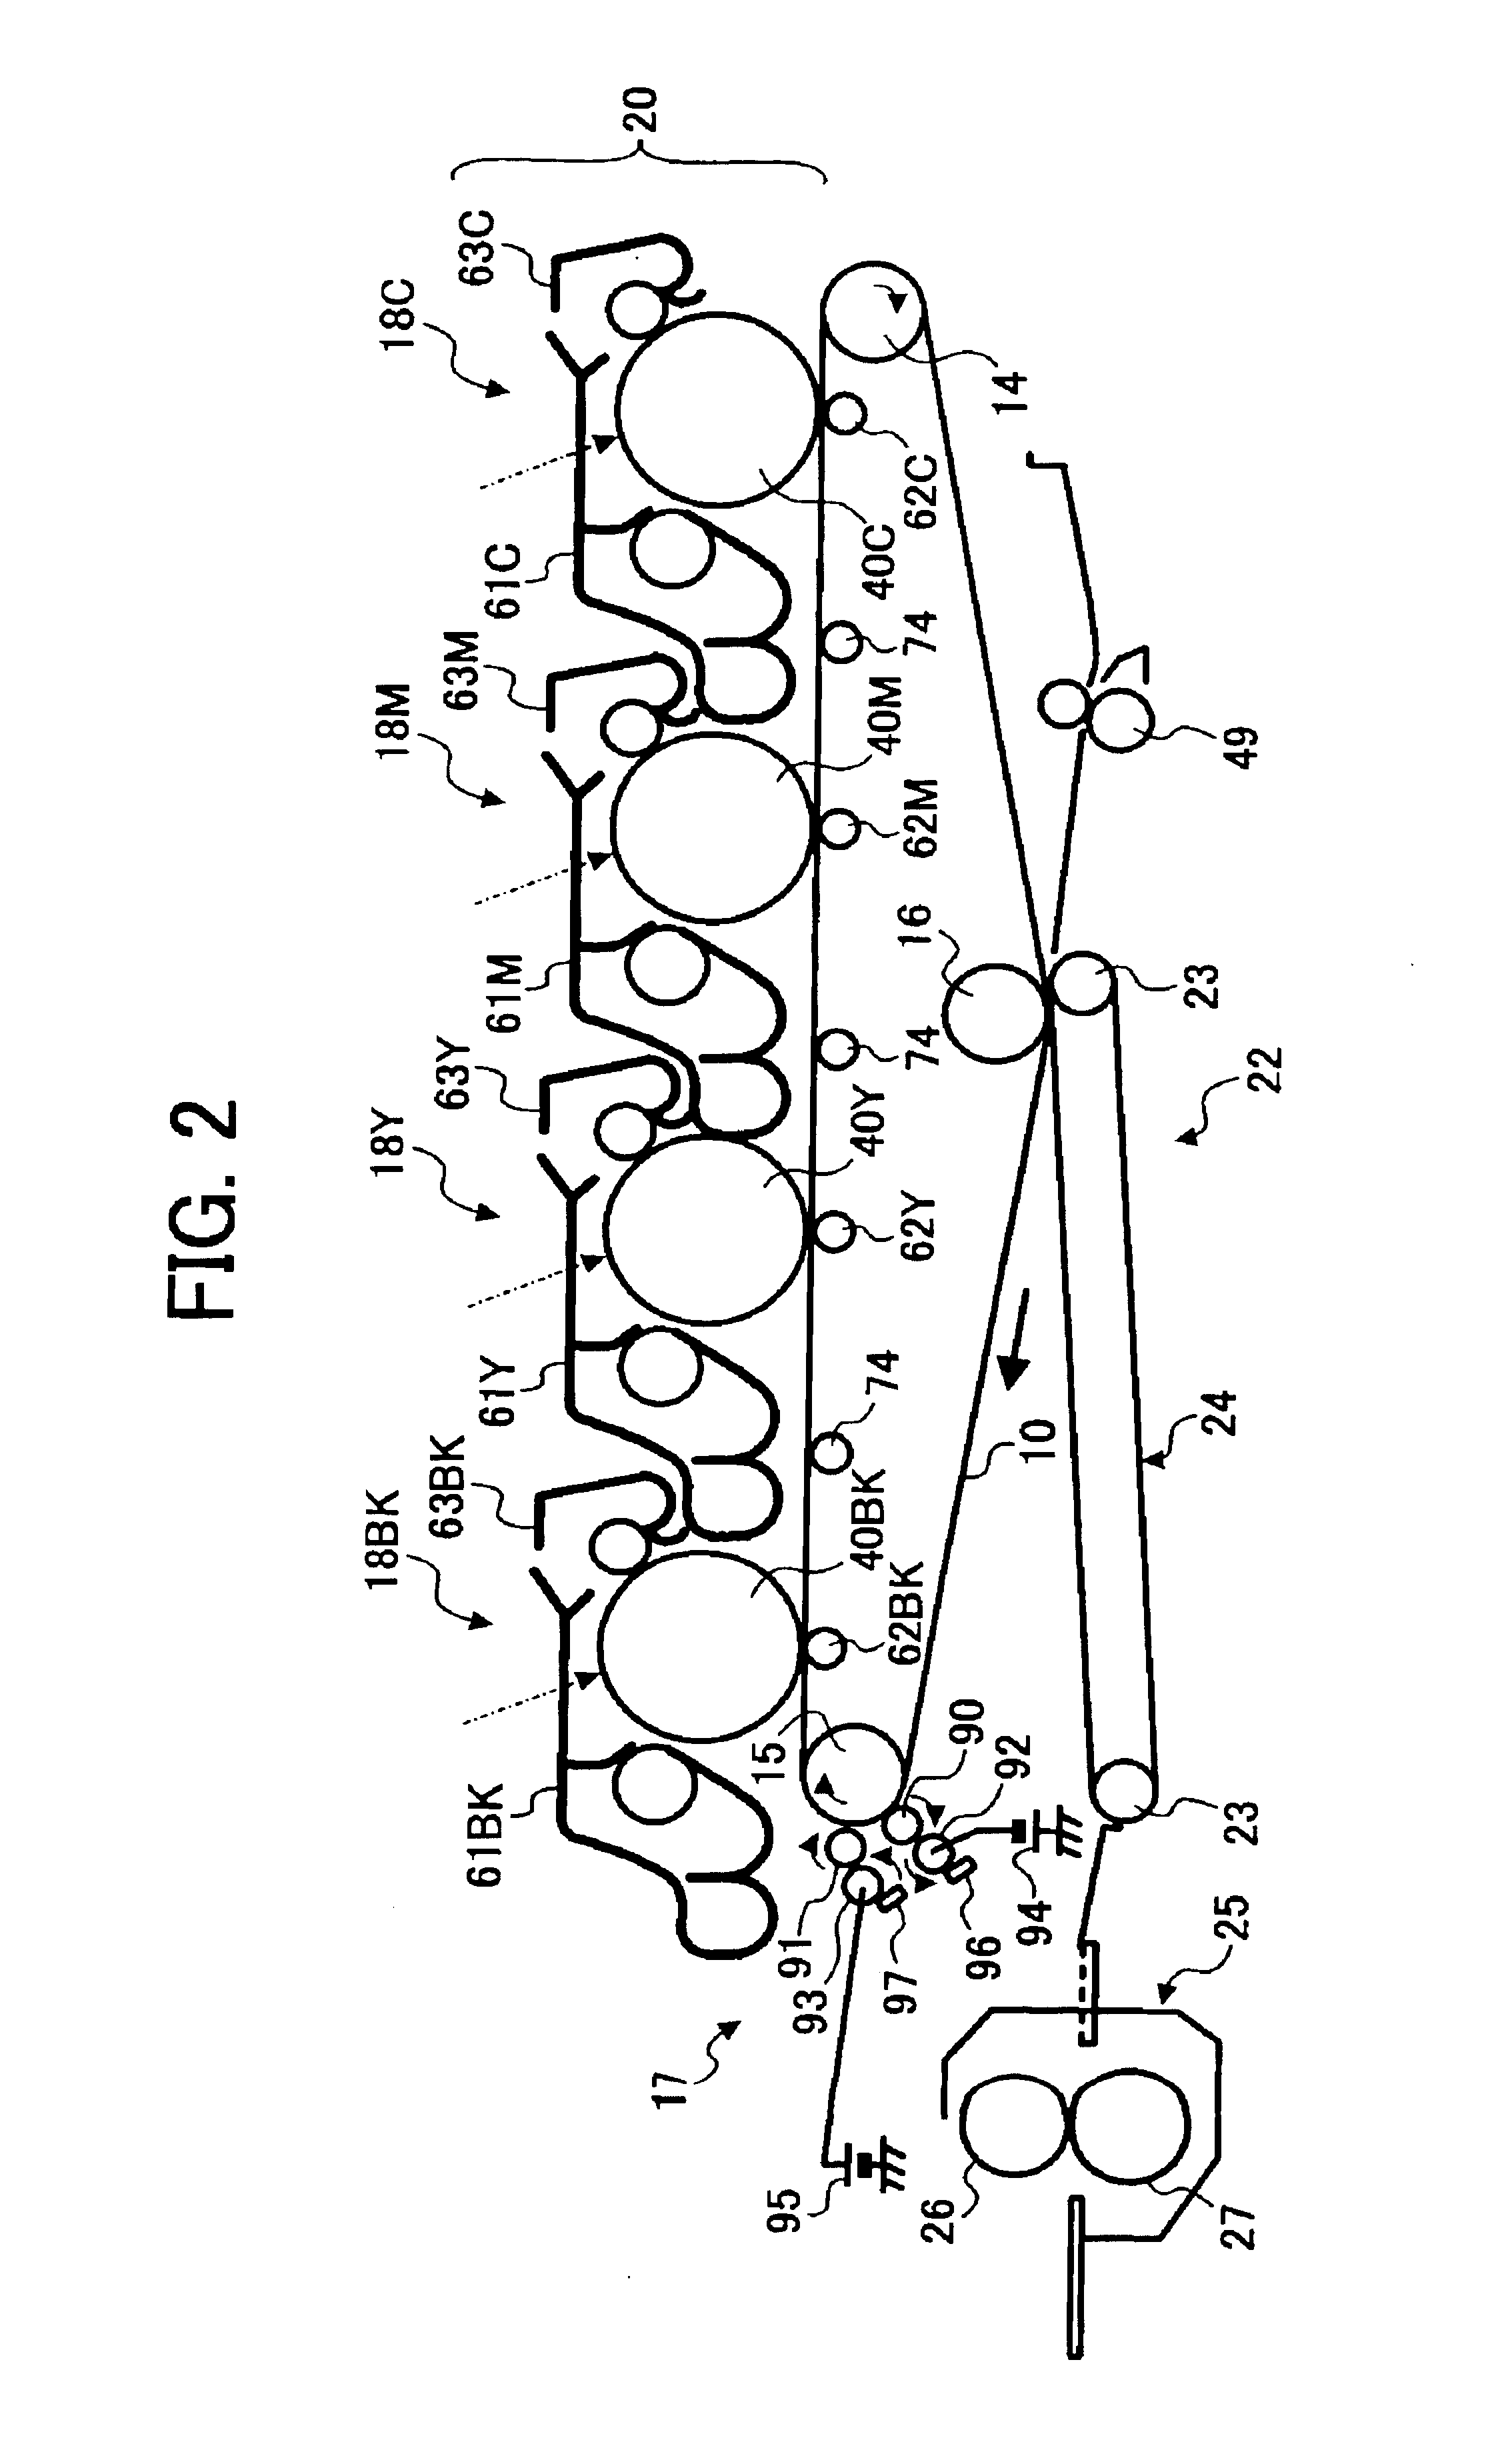 Color toner, method for manufacturing the toner, and image forming apparatus and method using the toner